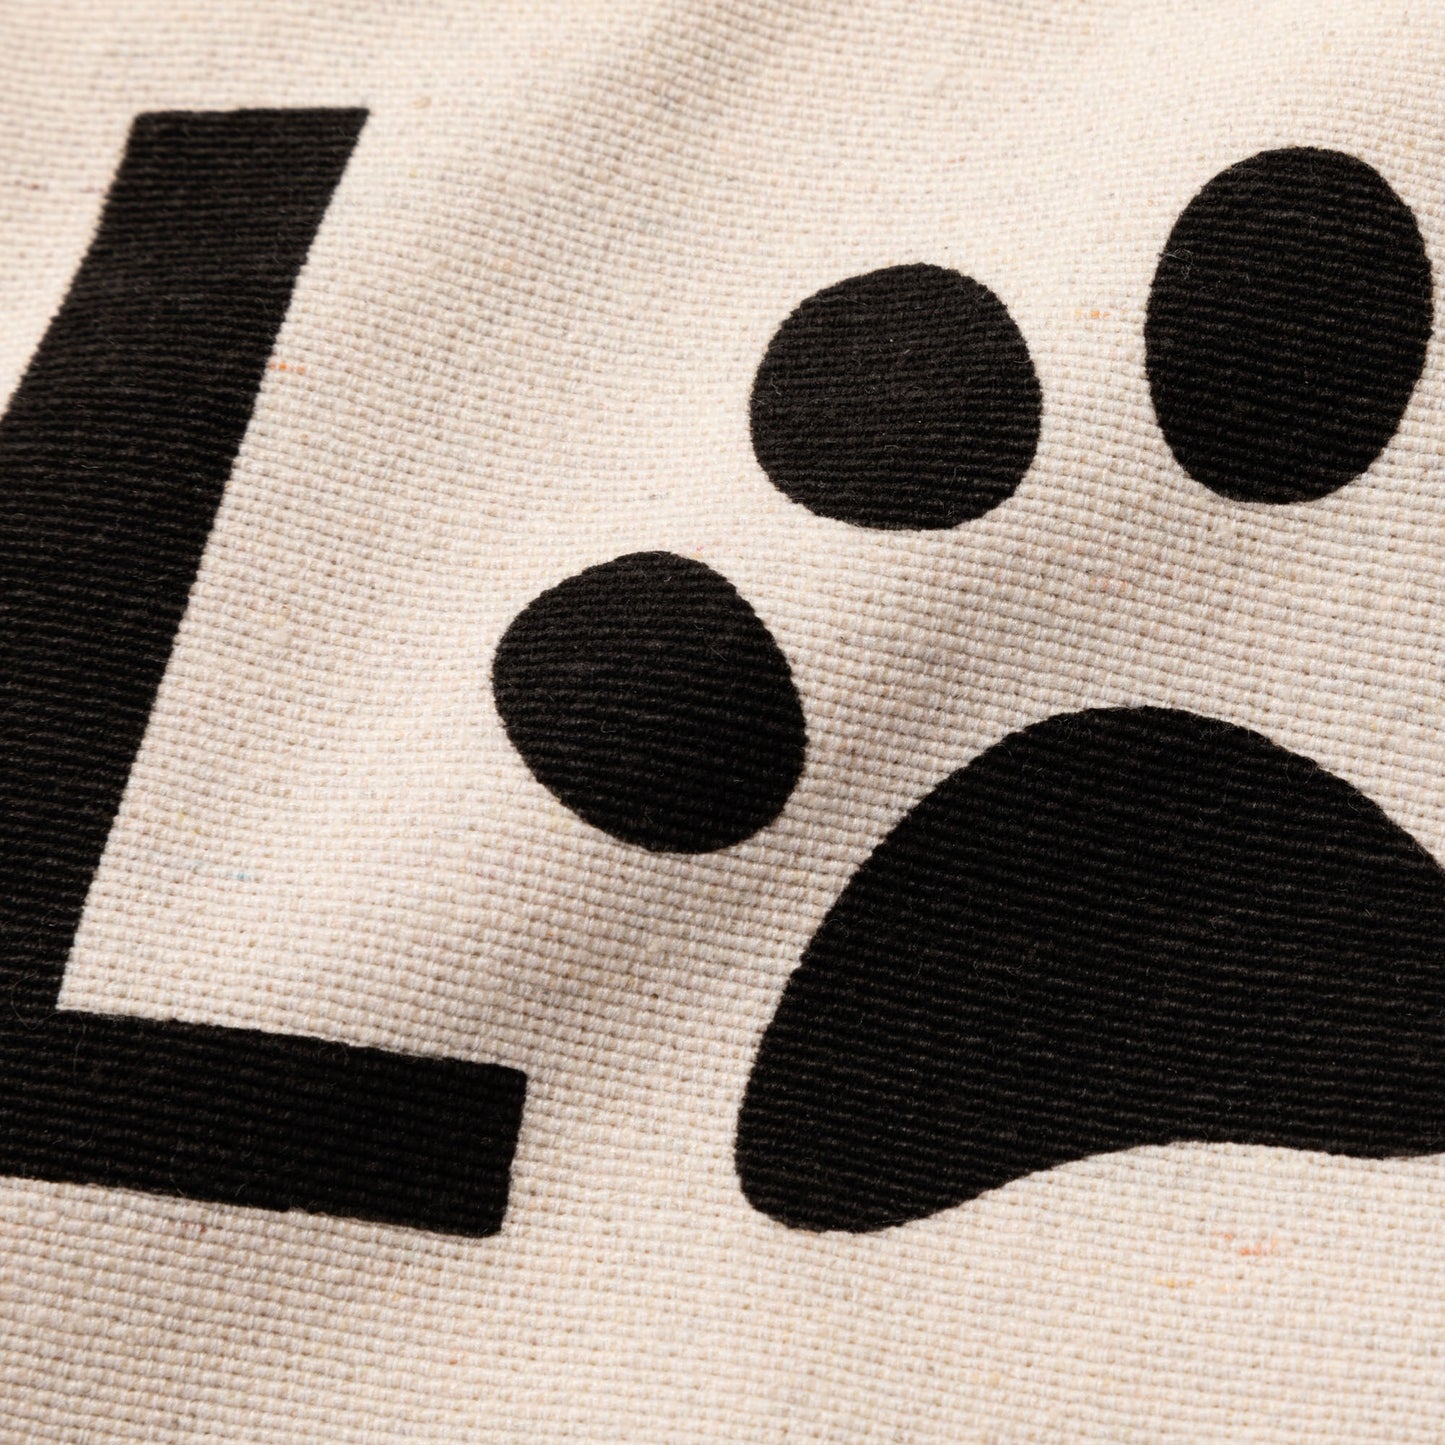 All About Dog Love Tote